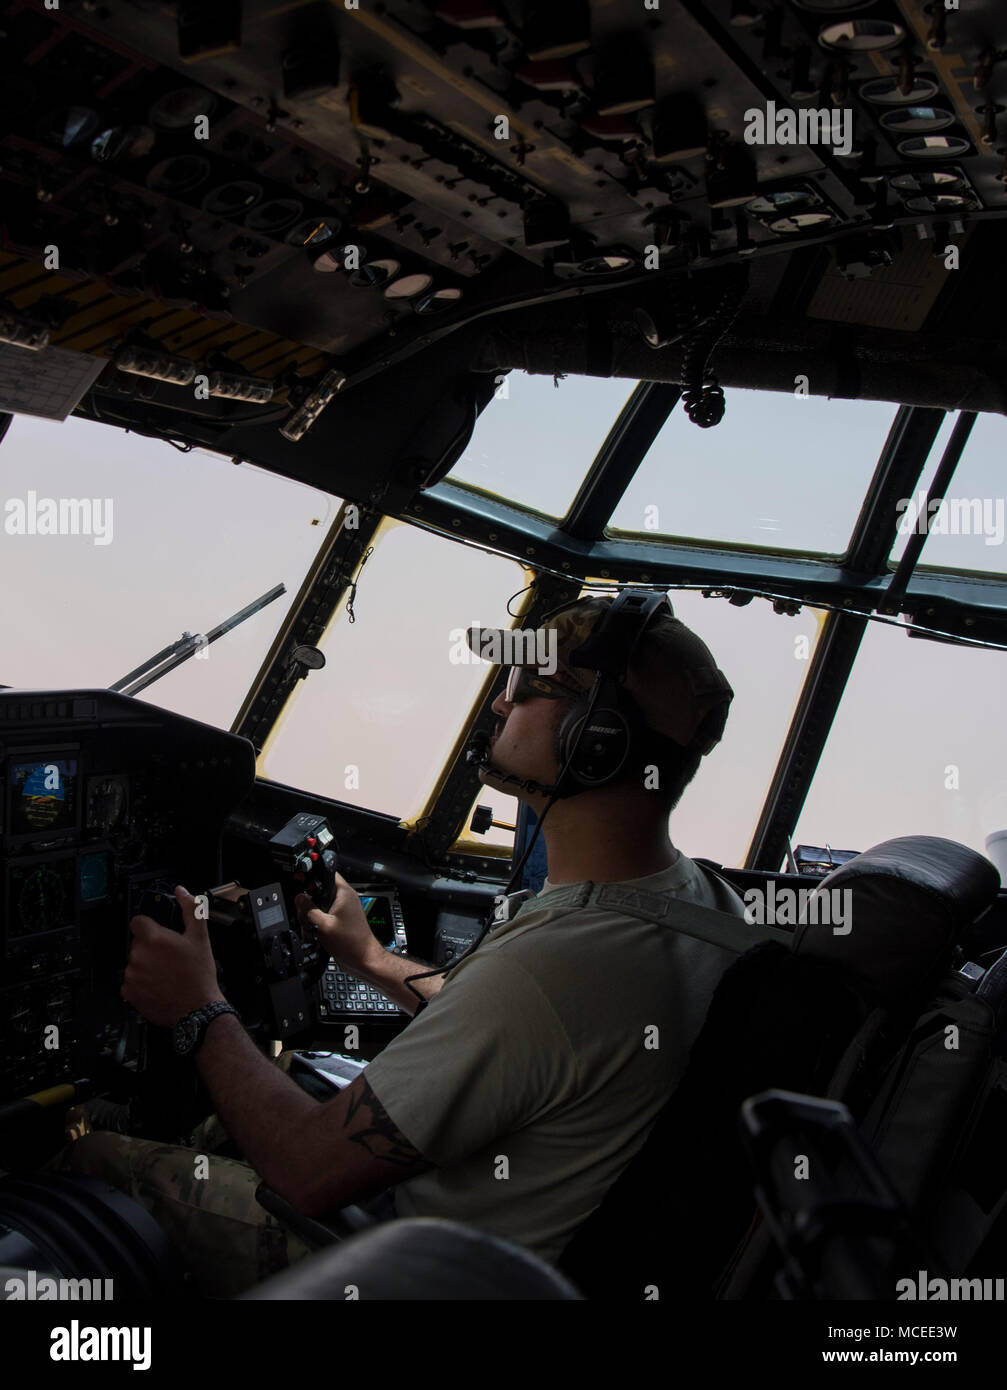 A pilot from the West Virginia Air National Guard controls a C-130H Hercules April 10, 2018, in Niger. Approximately 1,900 service members from more than 20 African and western partner nations are participating in Flintlock 2018 at multiple locations in Niger, Burkina Faso, and Senegal. Flintlock is an annual, African-led, integrated military and law enforcement exercise that has strengthened key partner nation forces throughout North and West Africa as well as western Special Operations Forces since 2005.  (U.S. Air Force photo/Senior Airman Clayton Cupit) Stock Photo